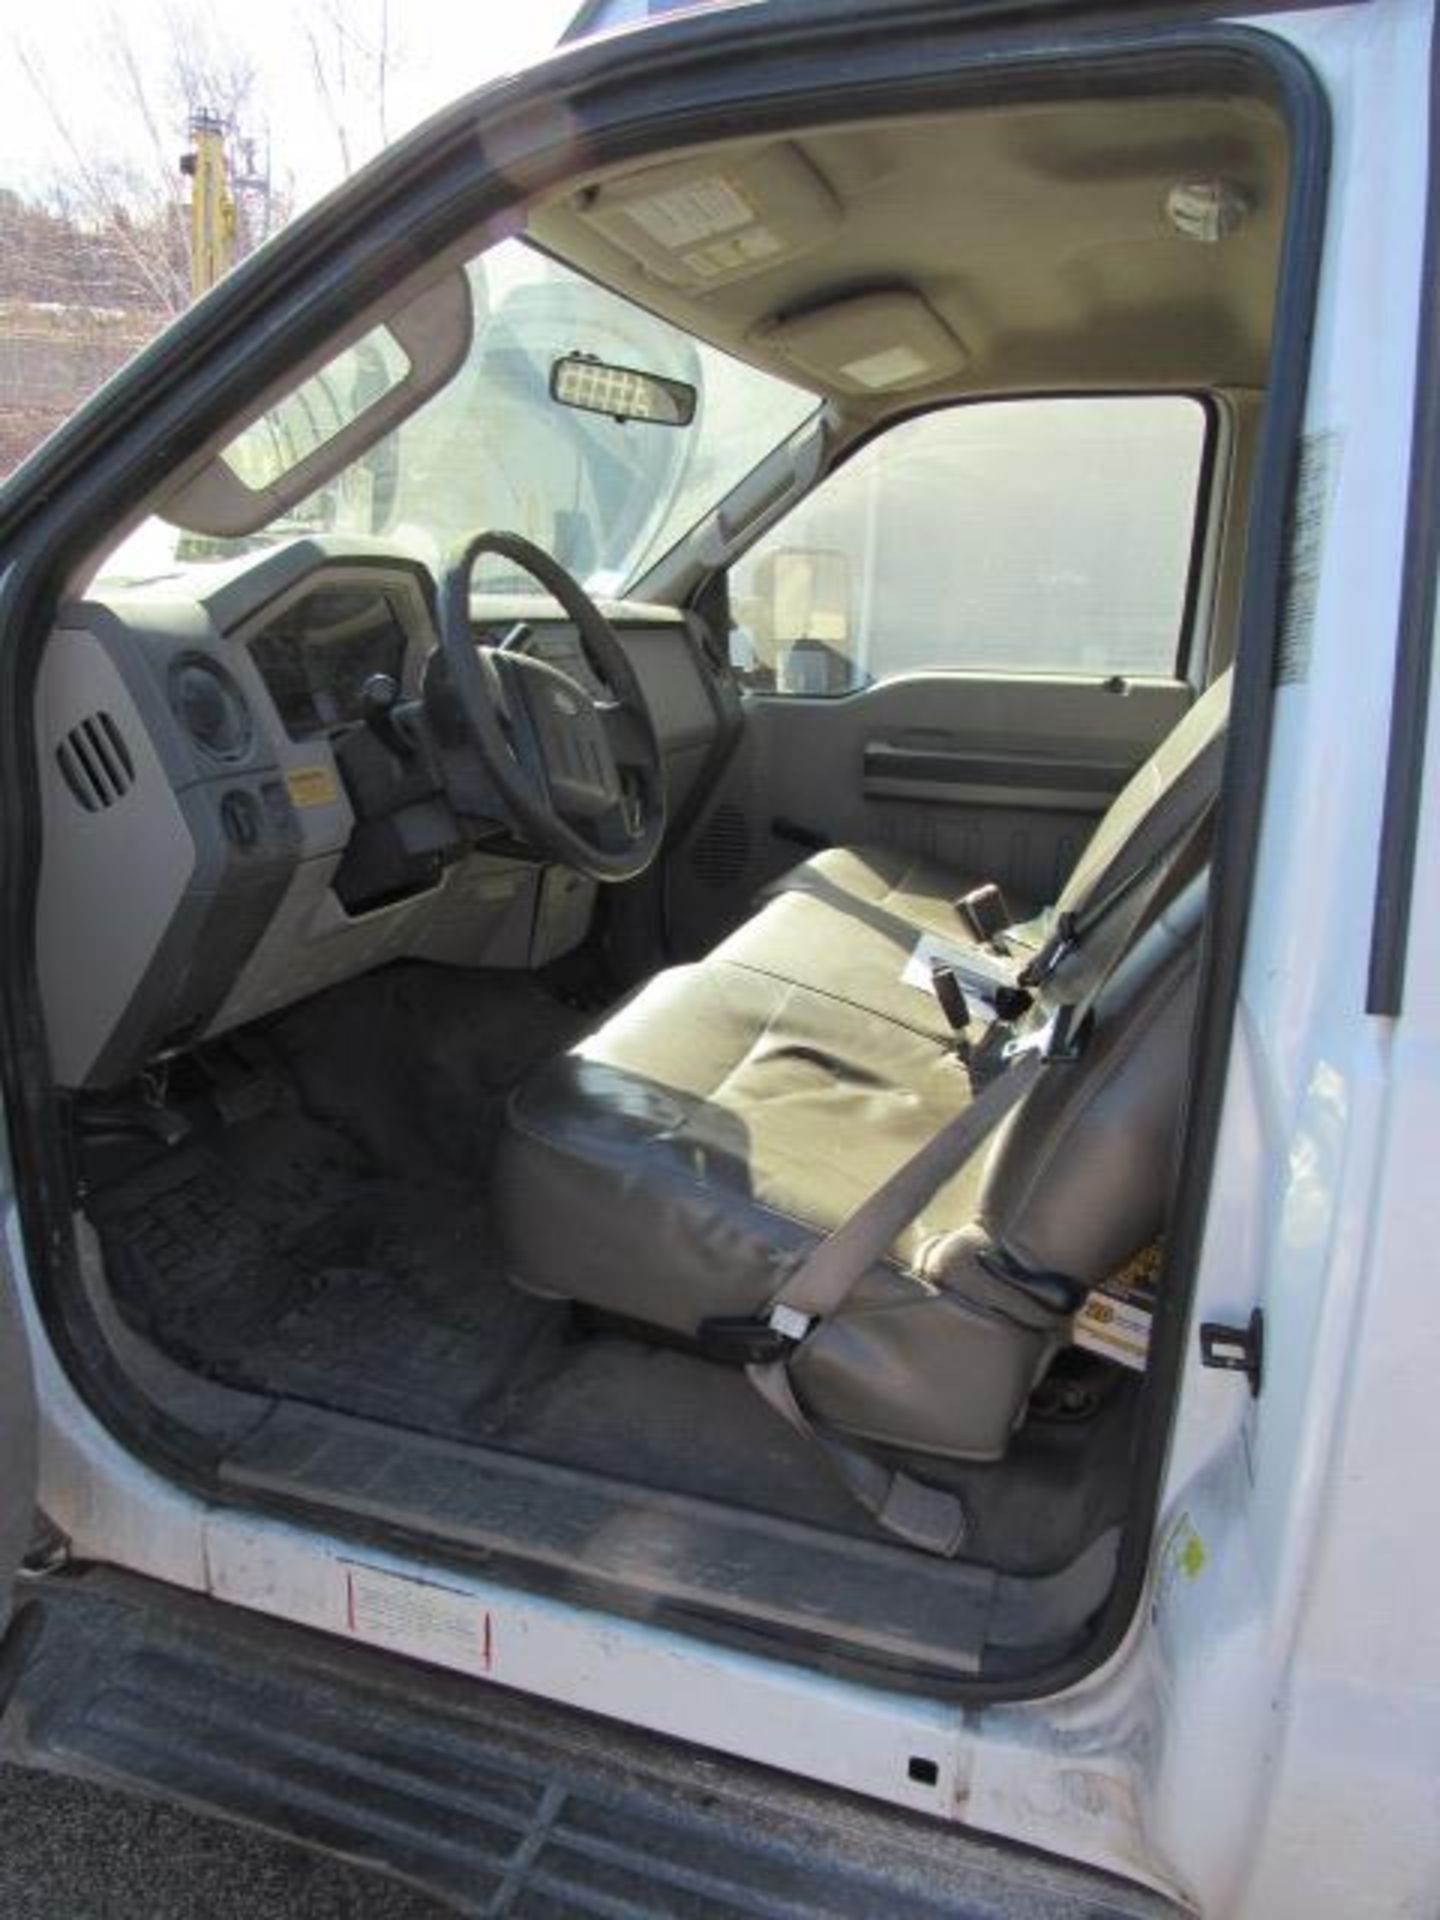 Ford F-350 Automatic Pick-Up Truck - Image 11 of 11